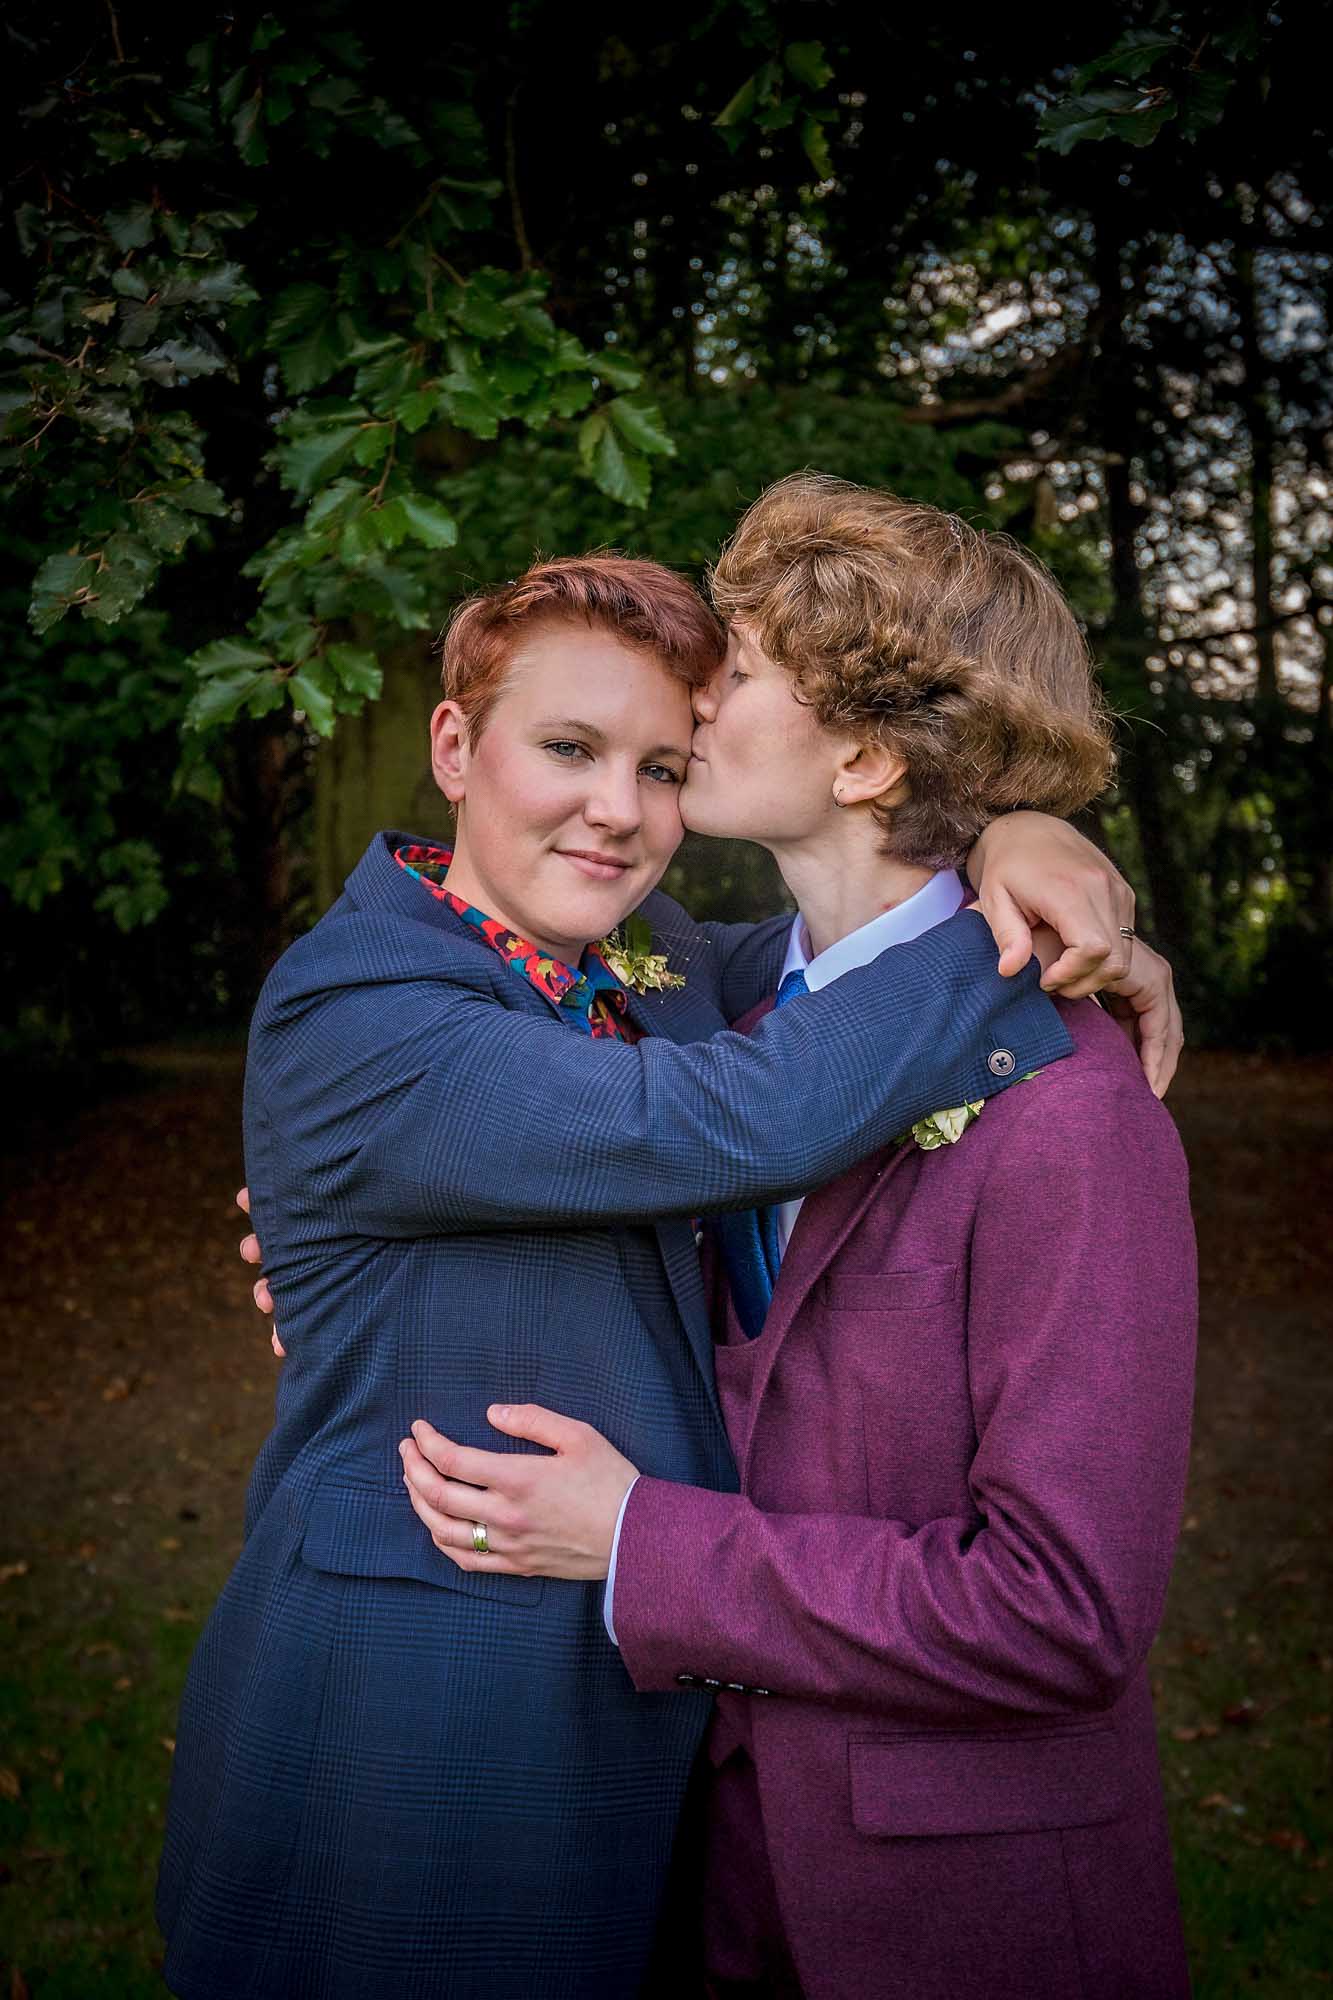 Bride gives camera eye-contact whilst her bride kisses her on cheek at LGBTQ wedding